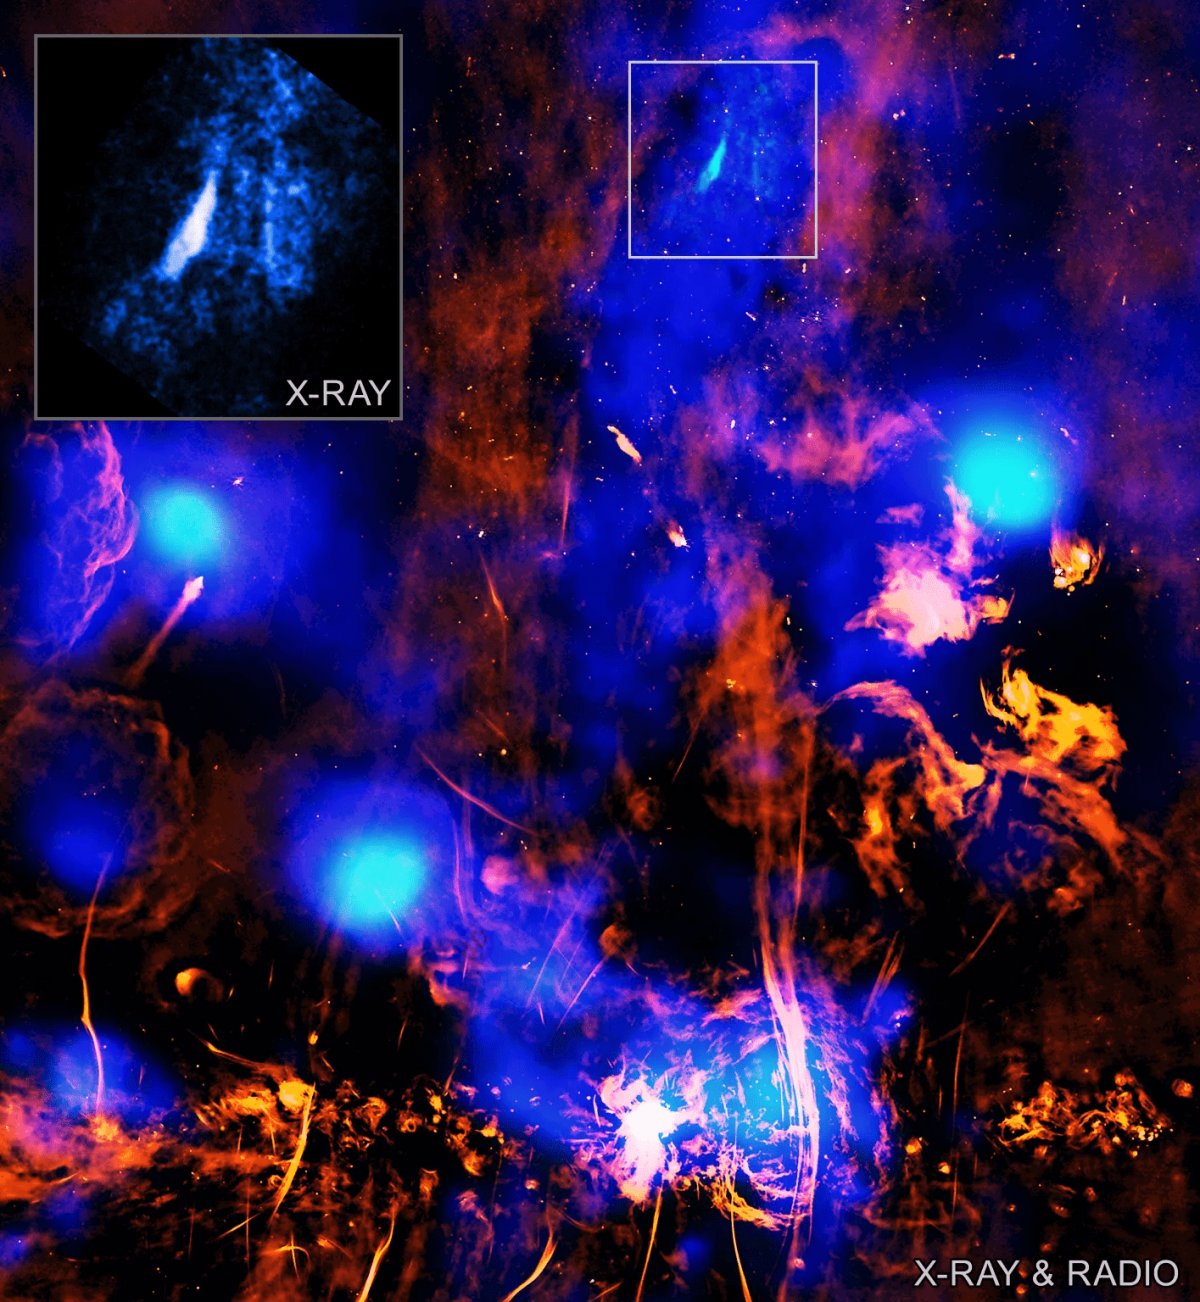 NASA’s Chandra Notices the Galactic Center is Venting